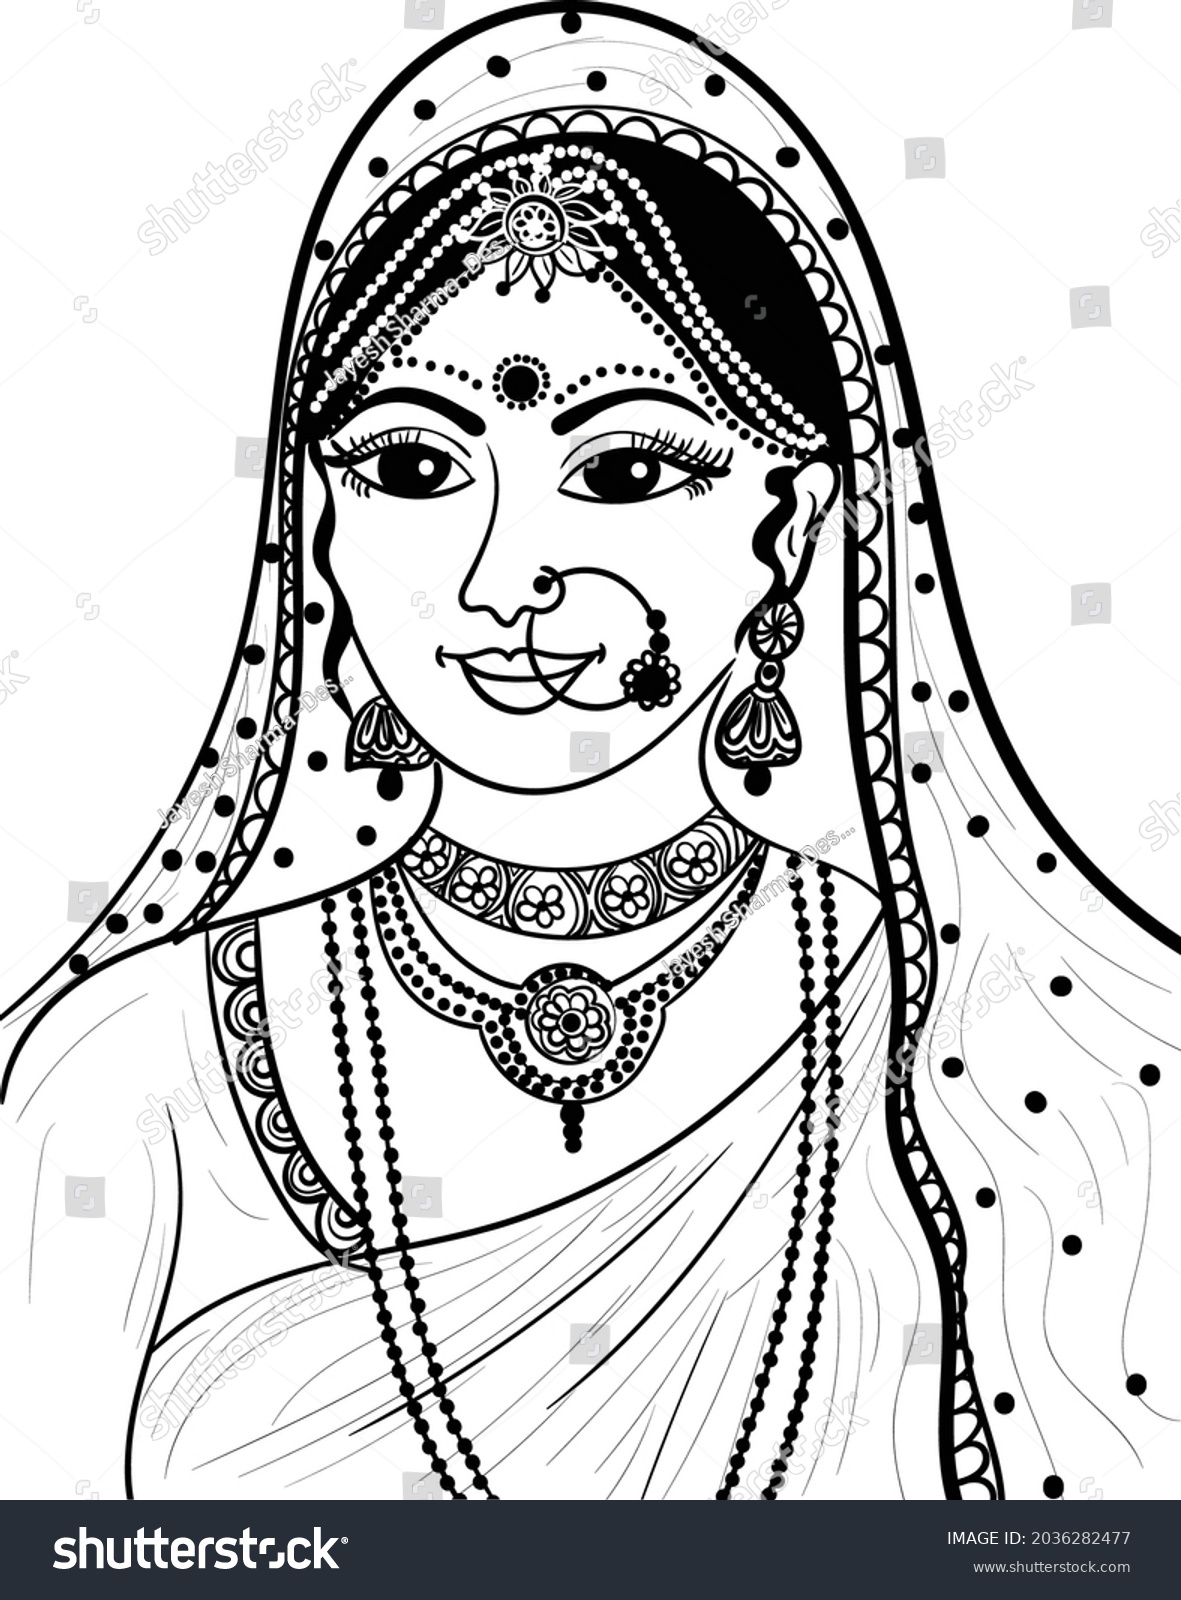 Indian Bride Black White Line Drawing Stock Vector (Royalty Free ...